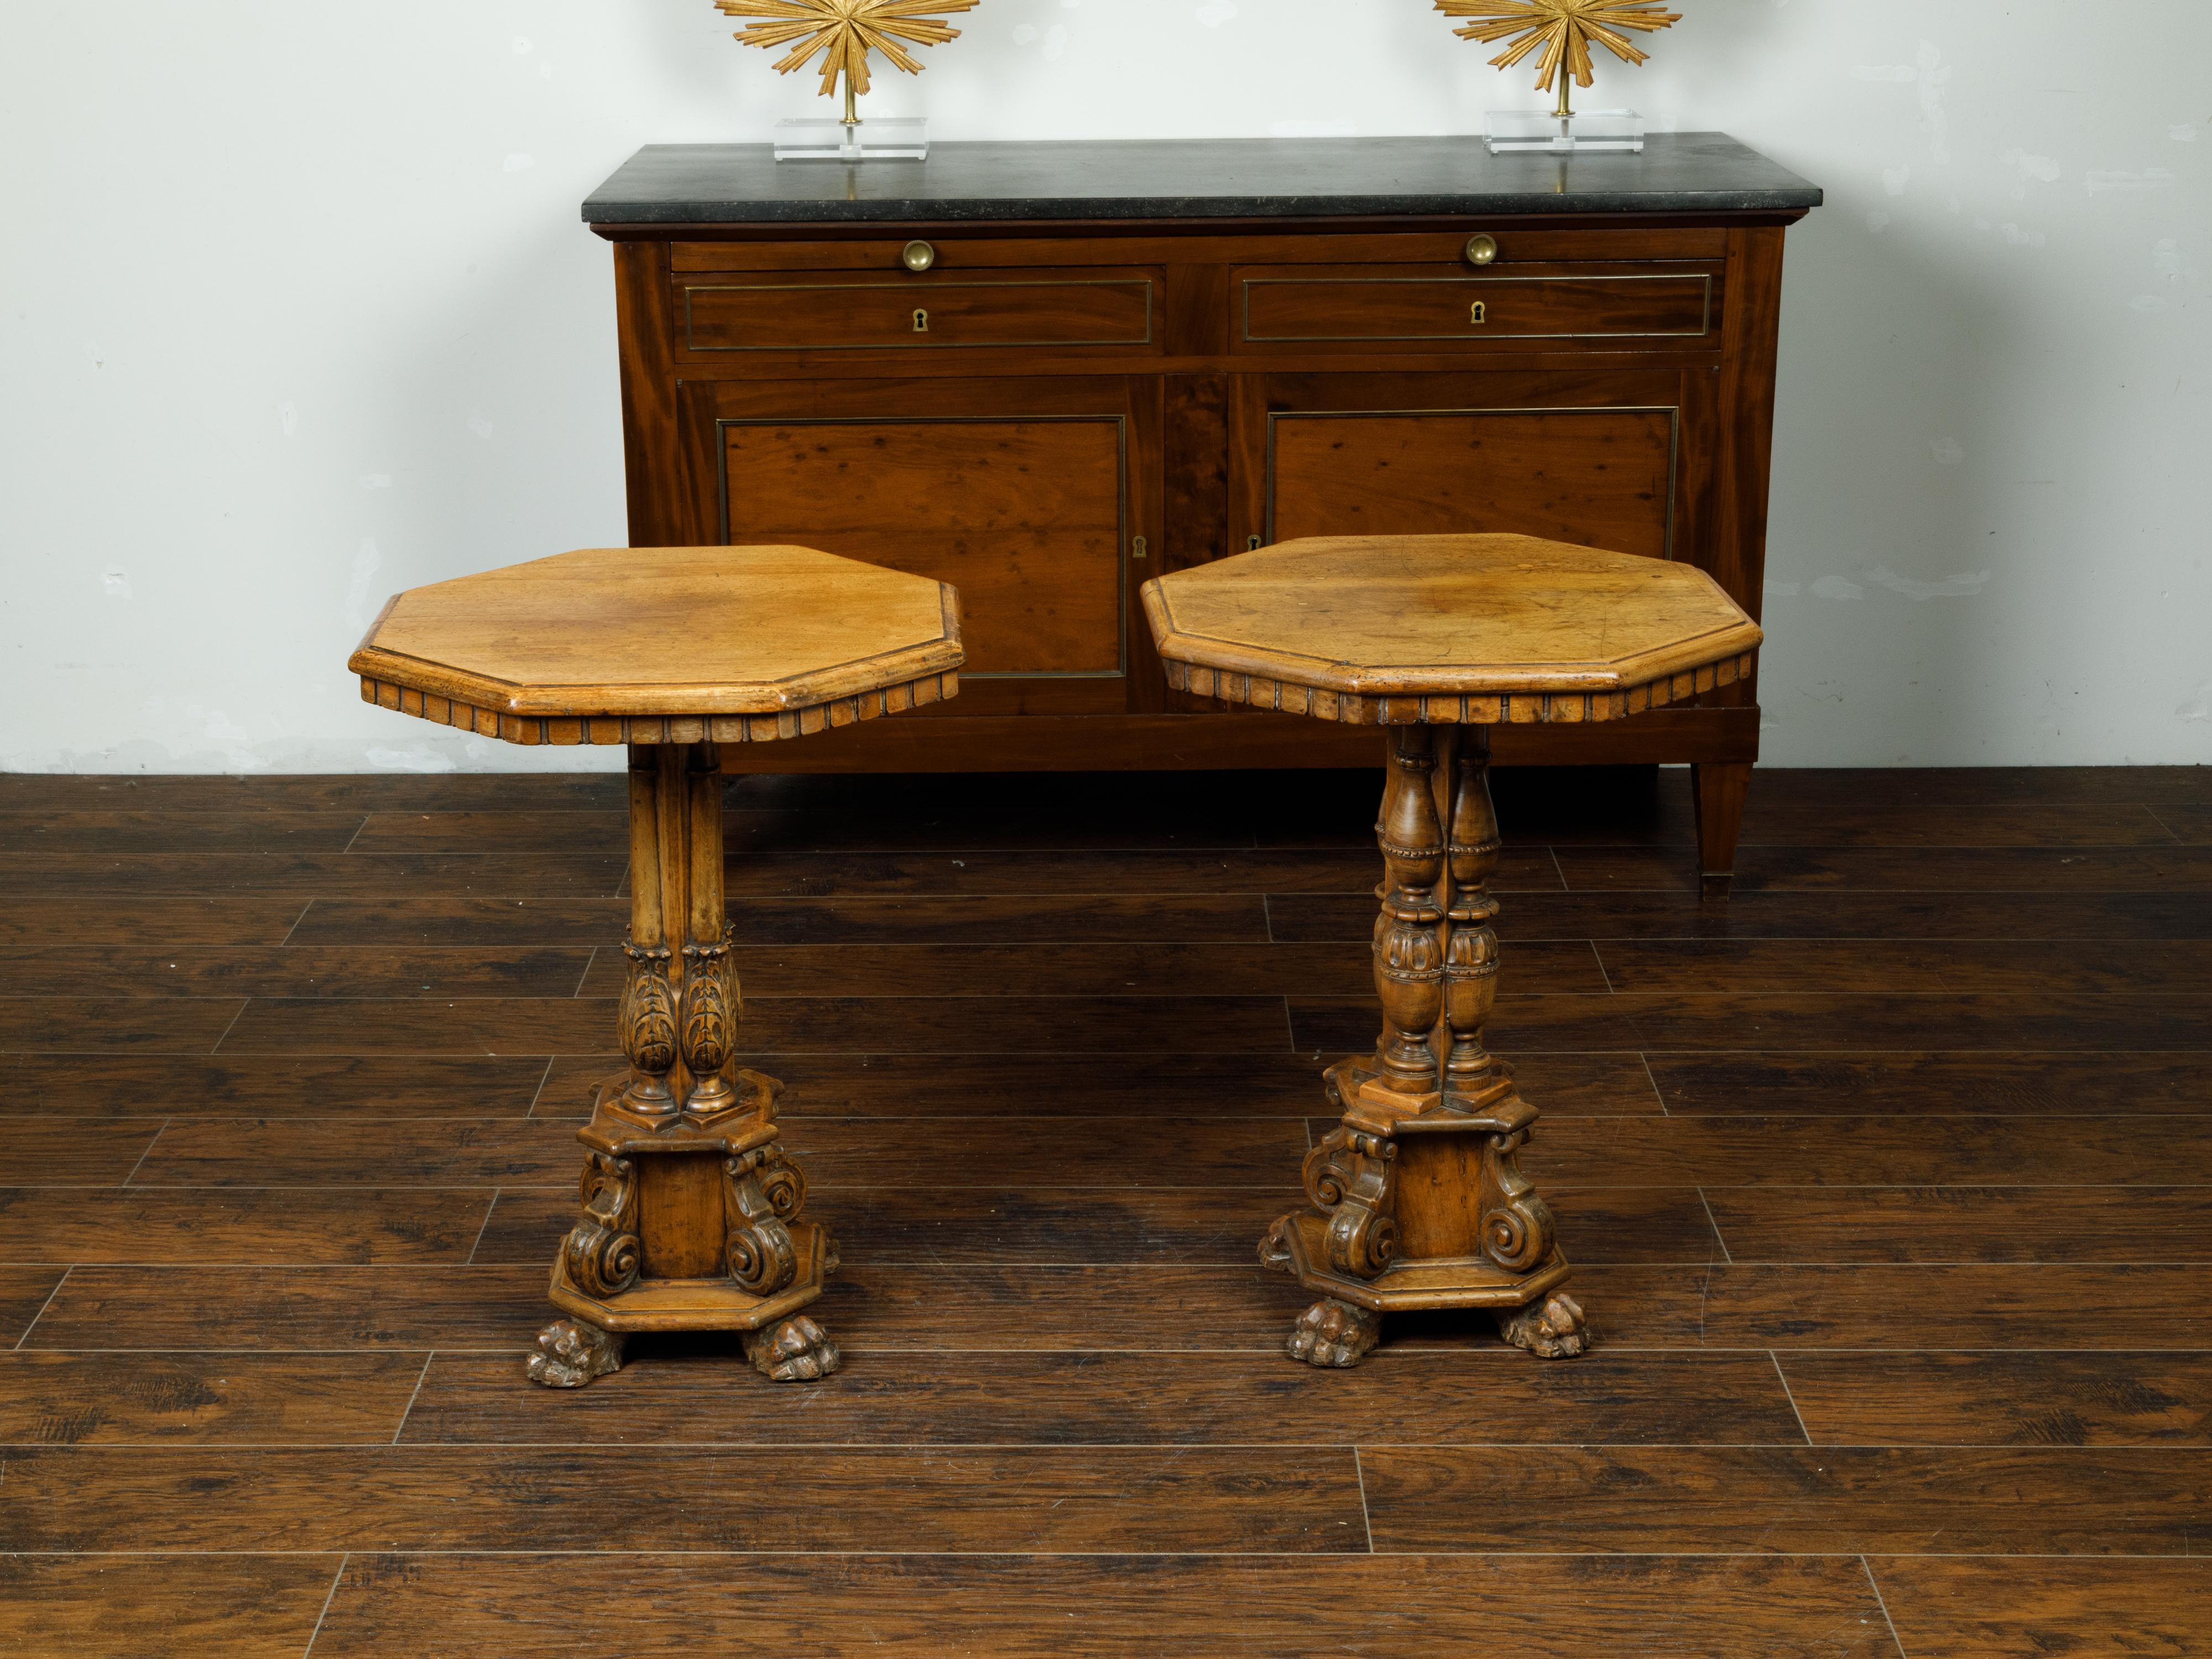 A pair of Italian walnut Guéridon side tables from the 19th century, with octagonal tops, dentil molding and ornate pedestal bases. Created in Italy during the 19th century, each of this pair of walnut Guéridon features an octagonal top boasting a